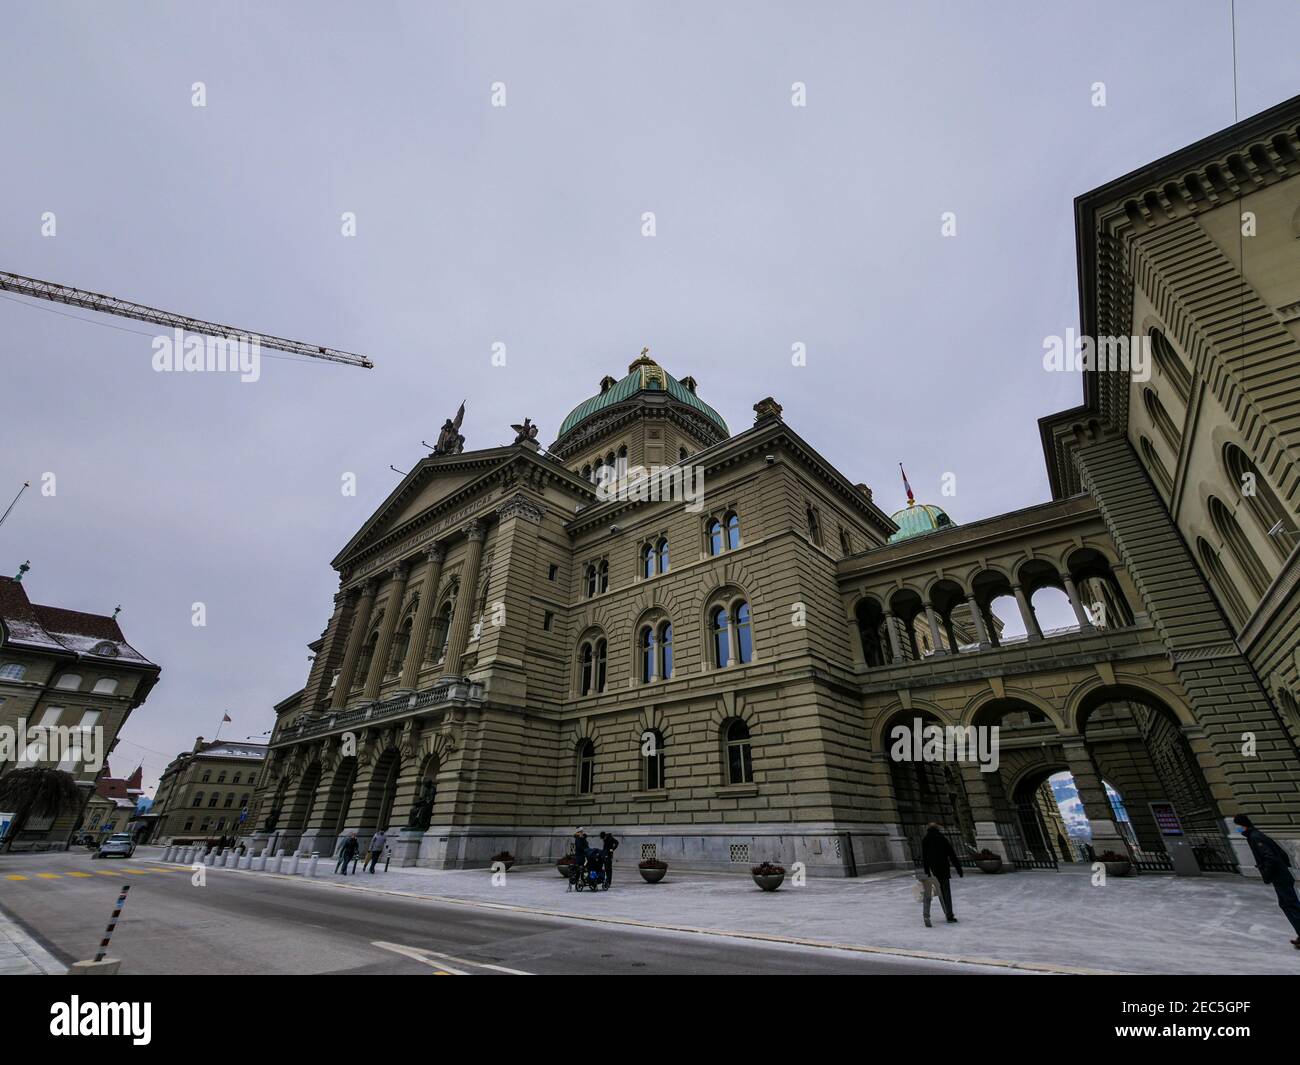 Federal Palace of Switzerland in winter Stock Photo